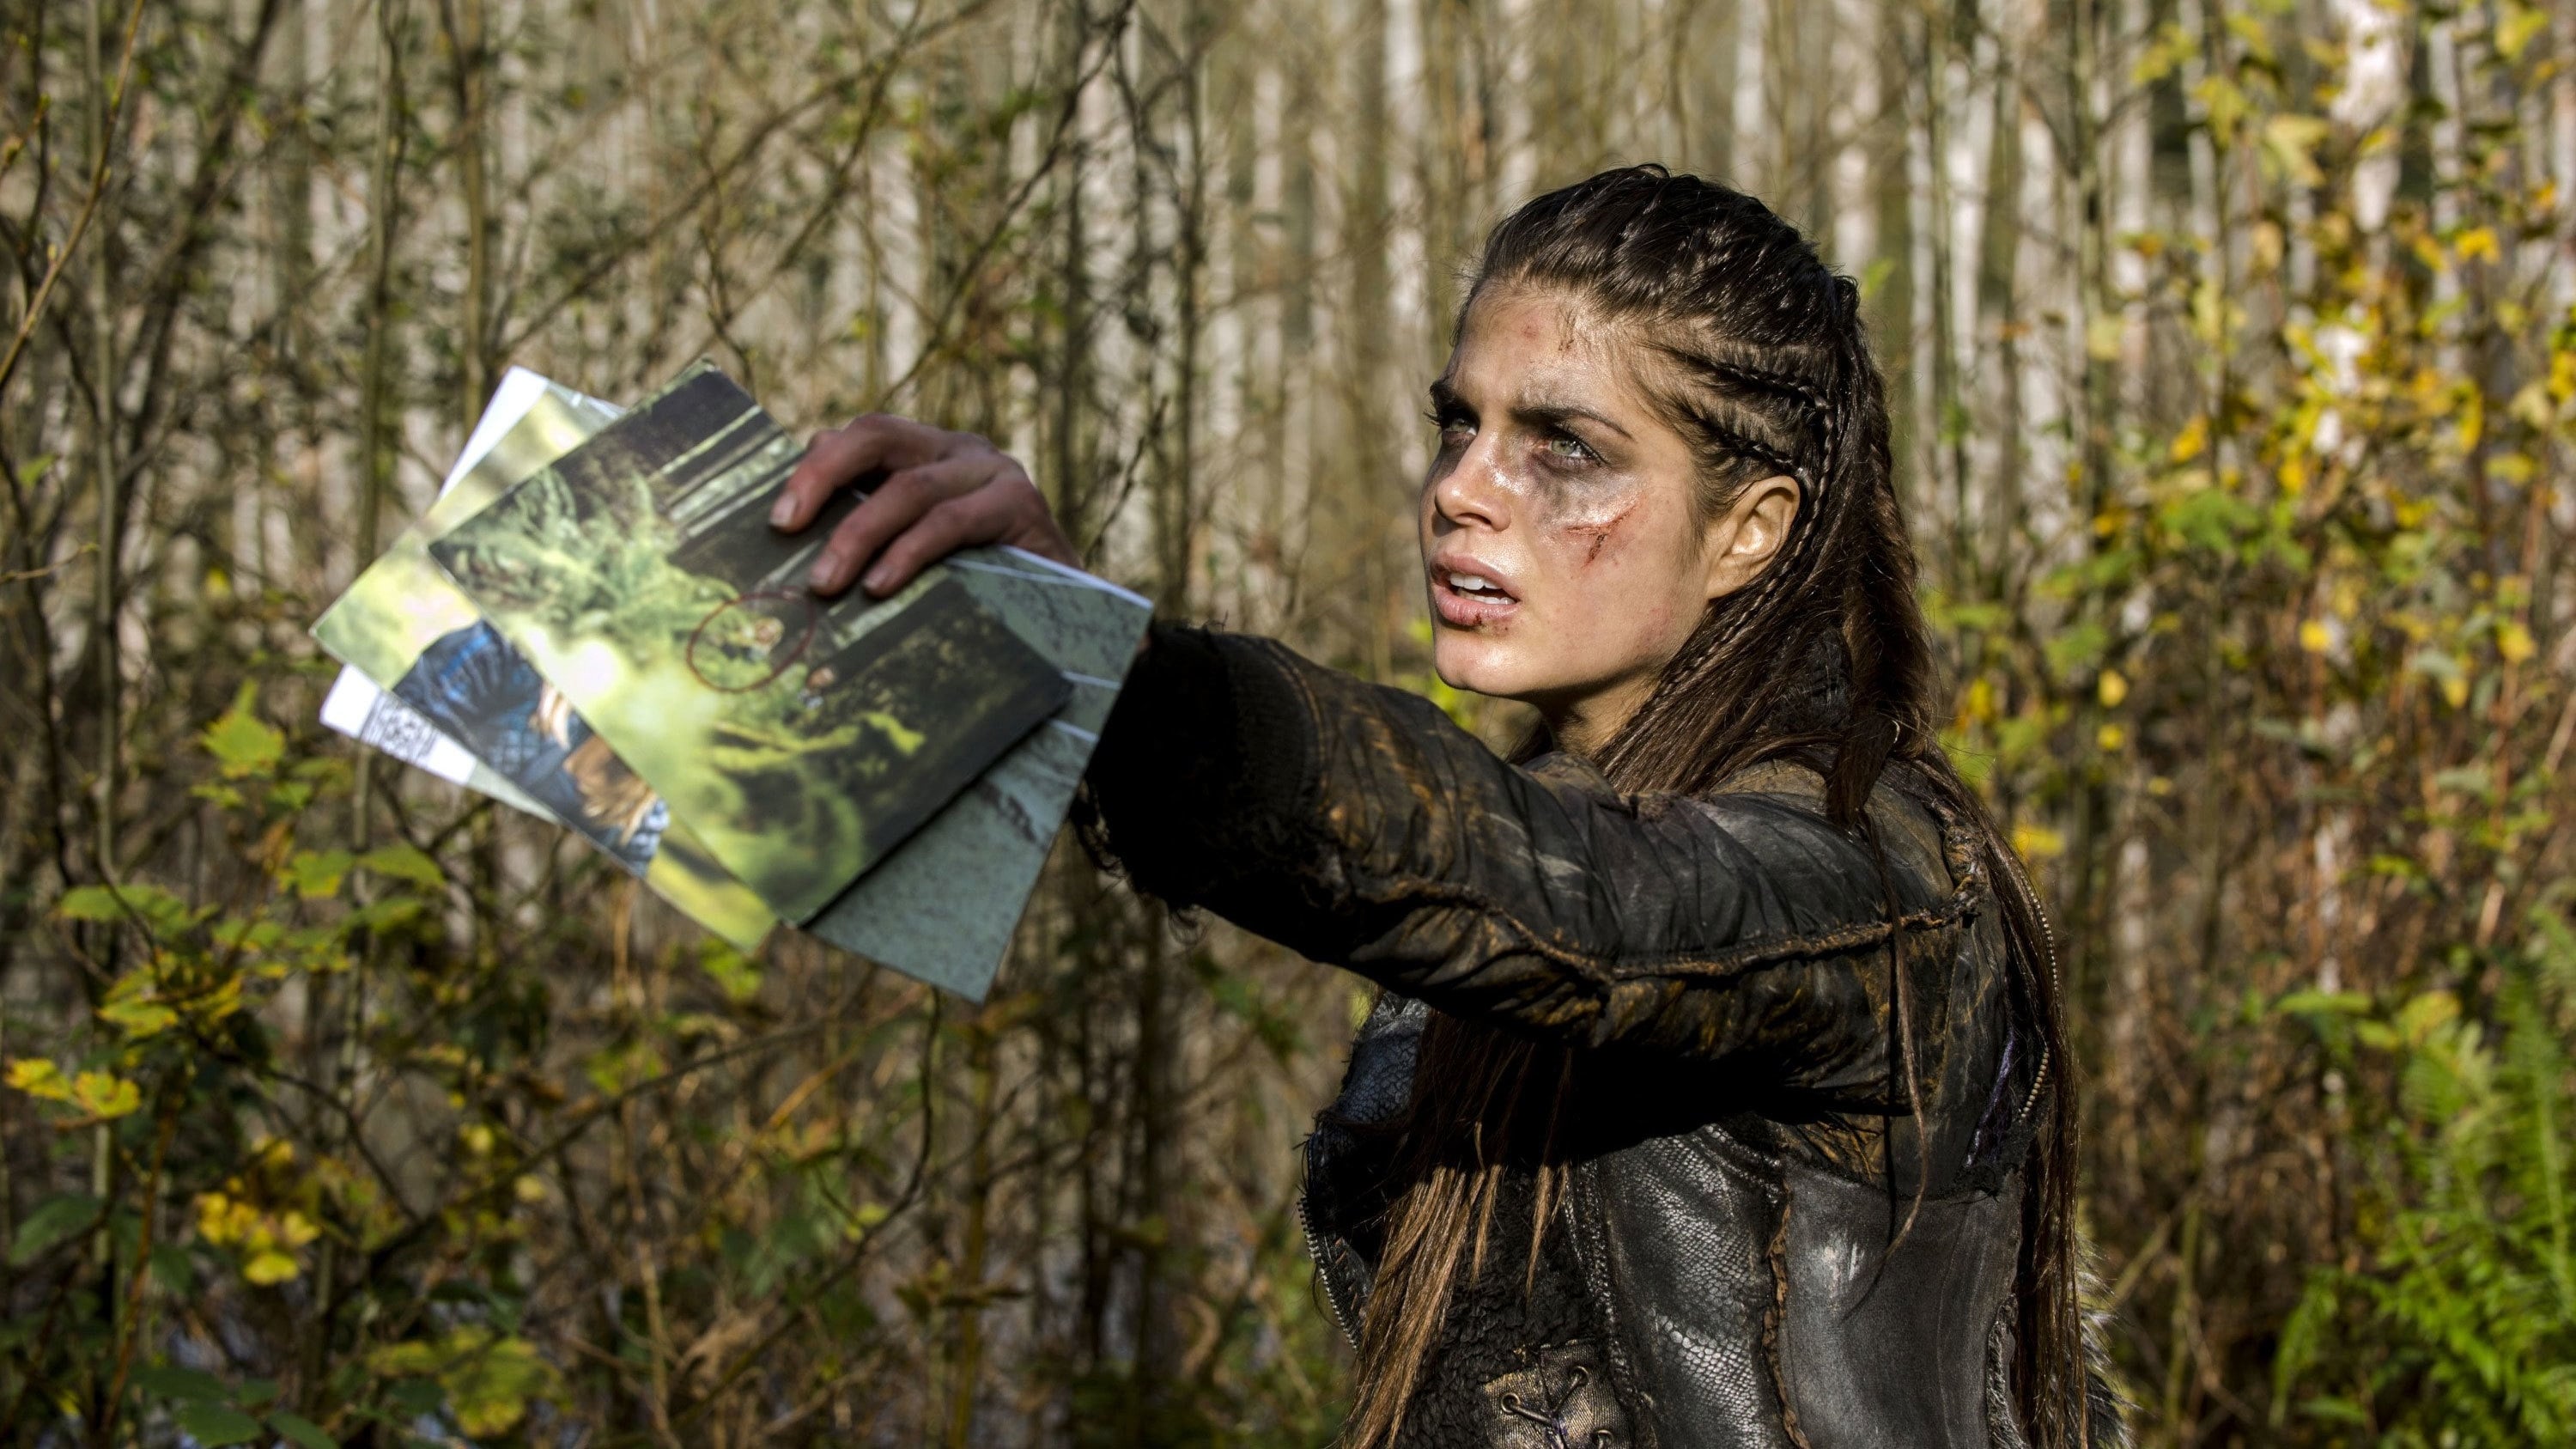 Image The 100 (2014) 1